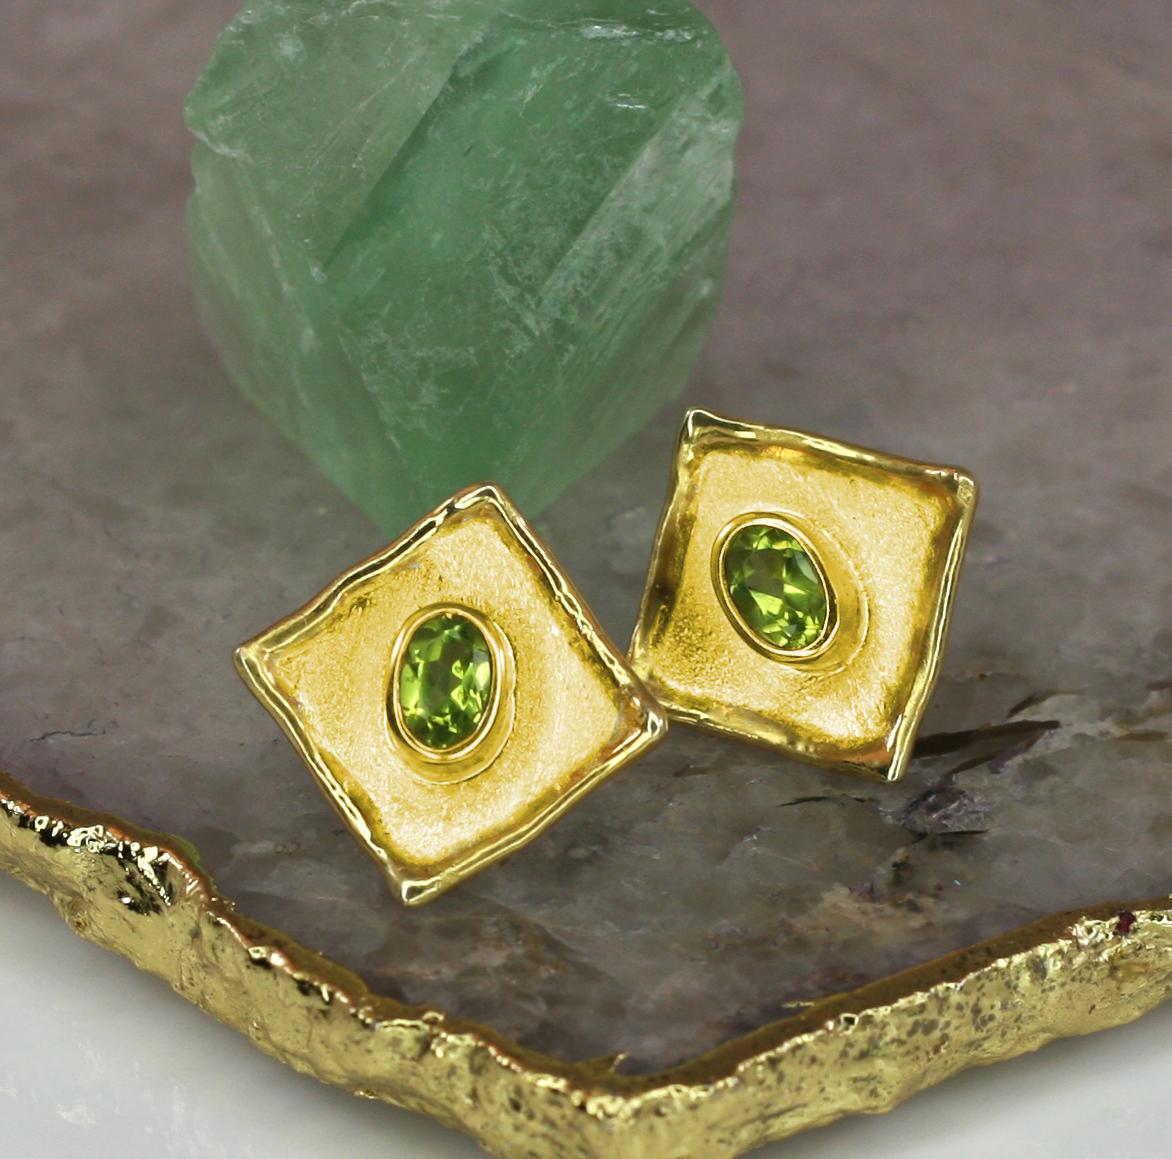 Yianni Creations designer stud earrings are 100% Handmade from 18 Karat Yellow Gold. Each gorgeous earring features a 0.50 Carat Oval Cut natural Peridot. The unique look is created by the brushed texture and nature-inspired liquid edges. 
Contact